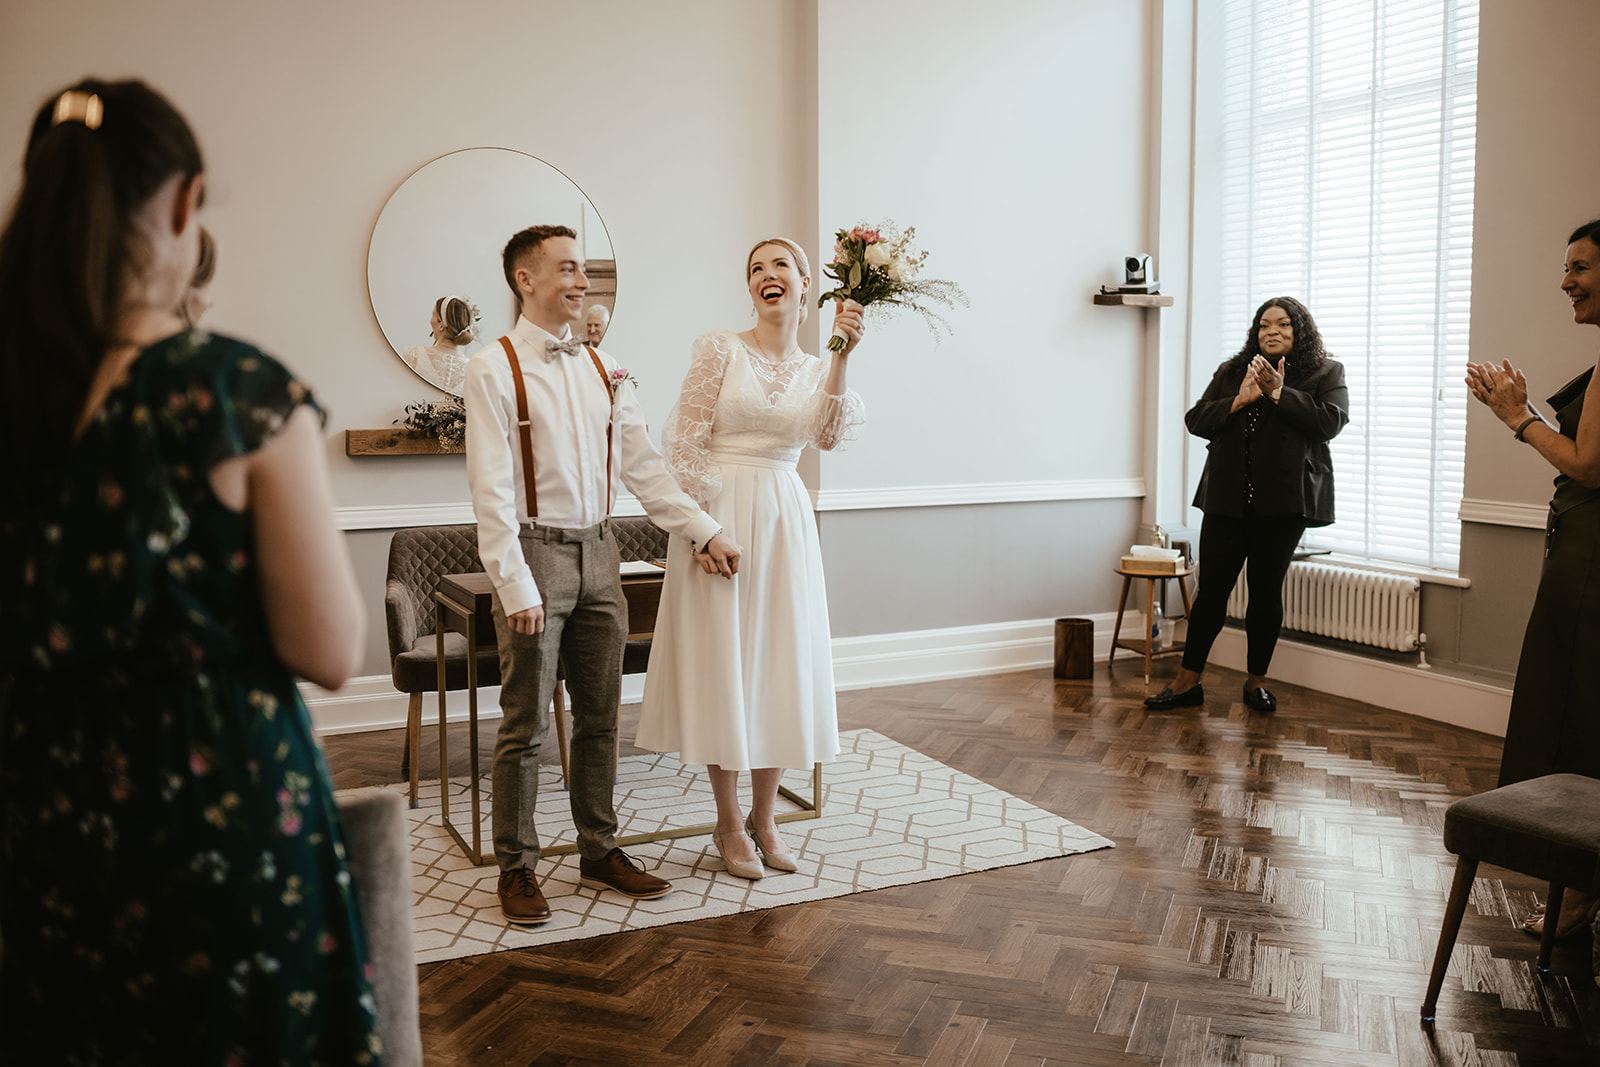 Alex and Christina's Wedding ceremony in the room 99 at Islington Town Hall